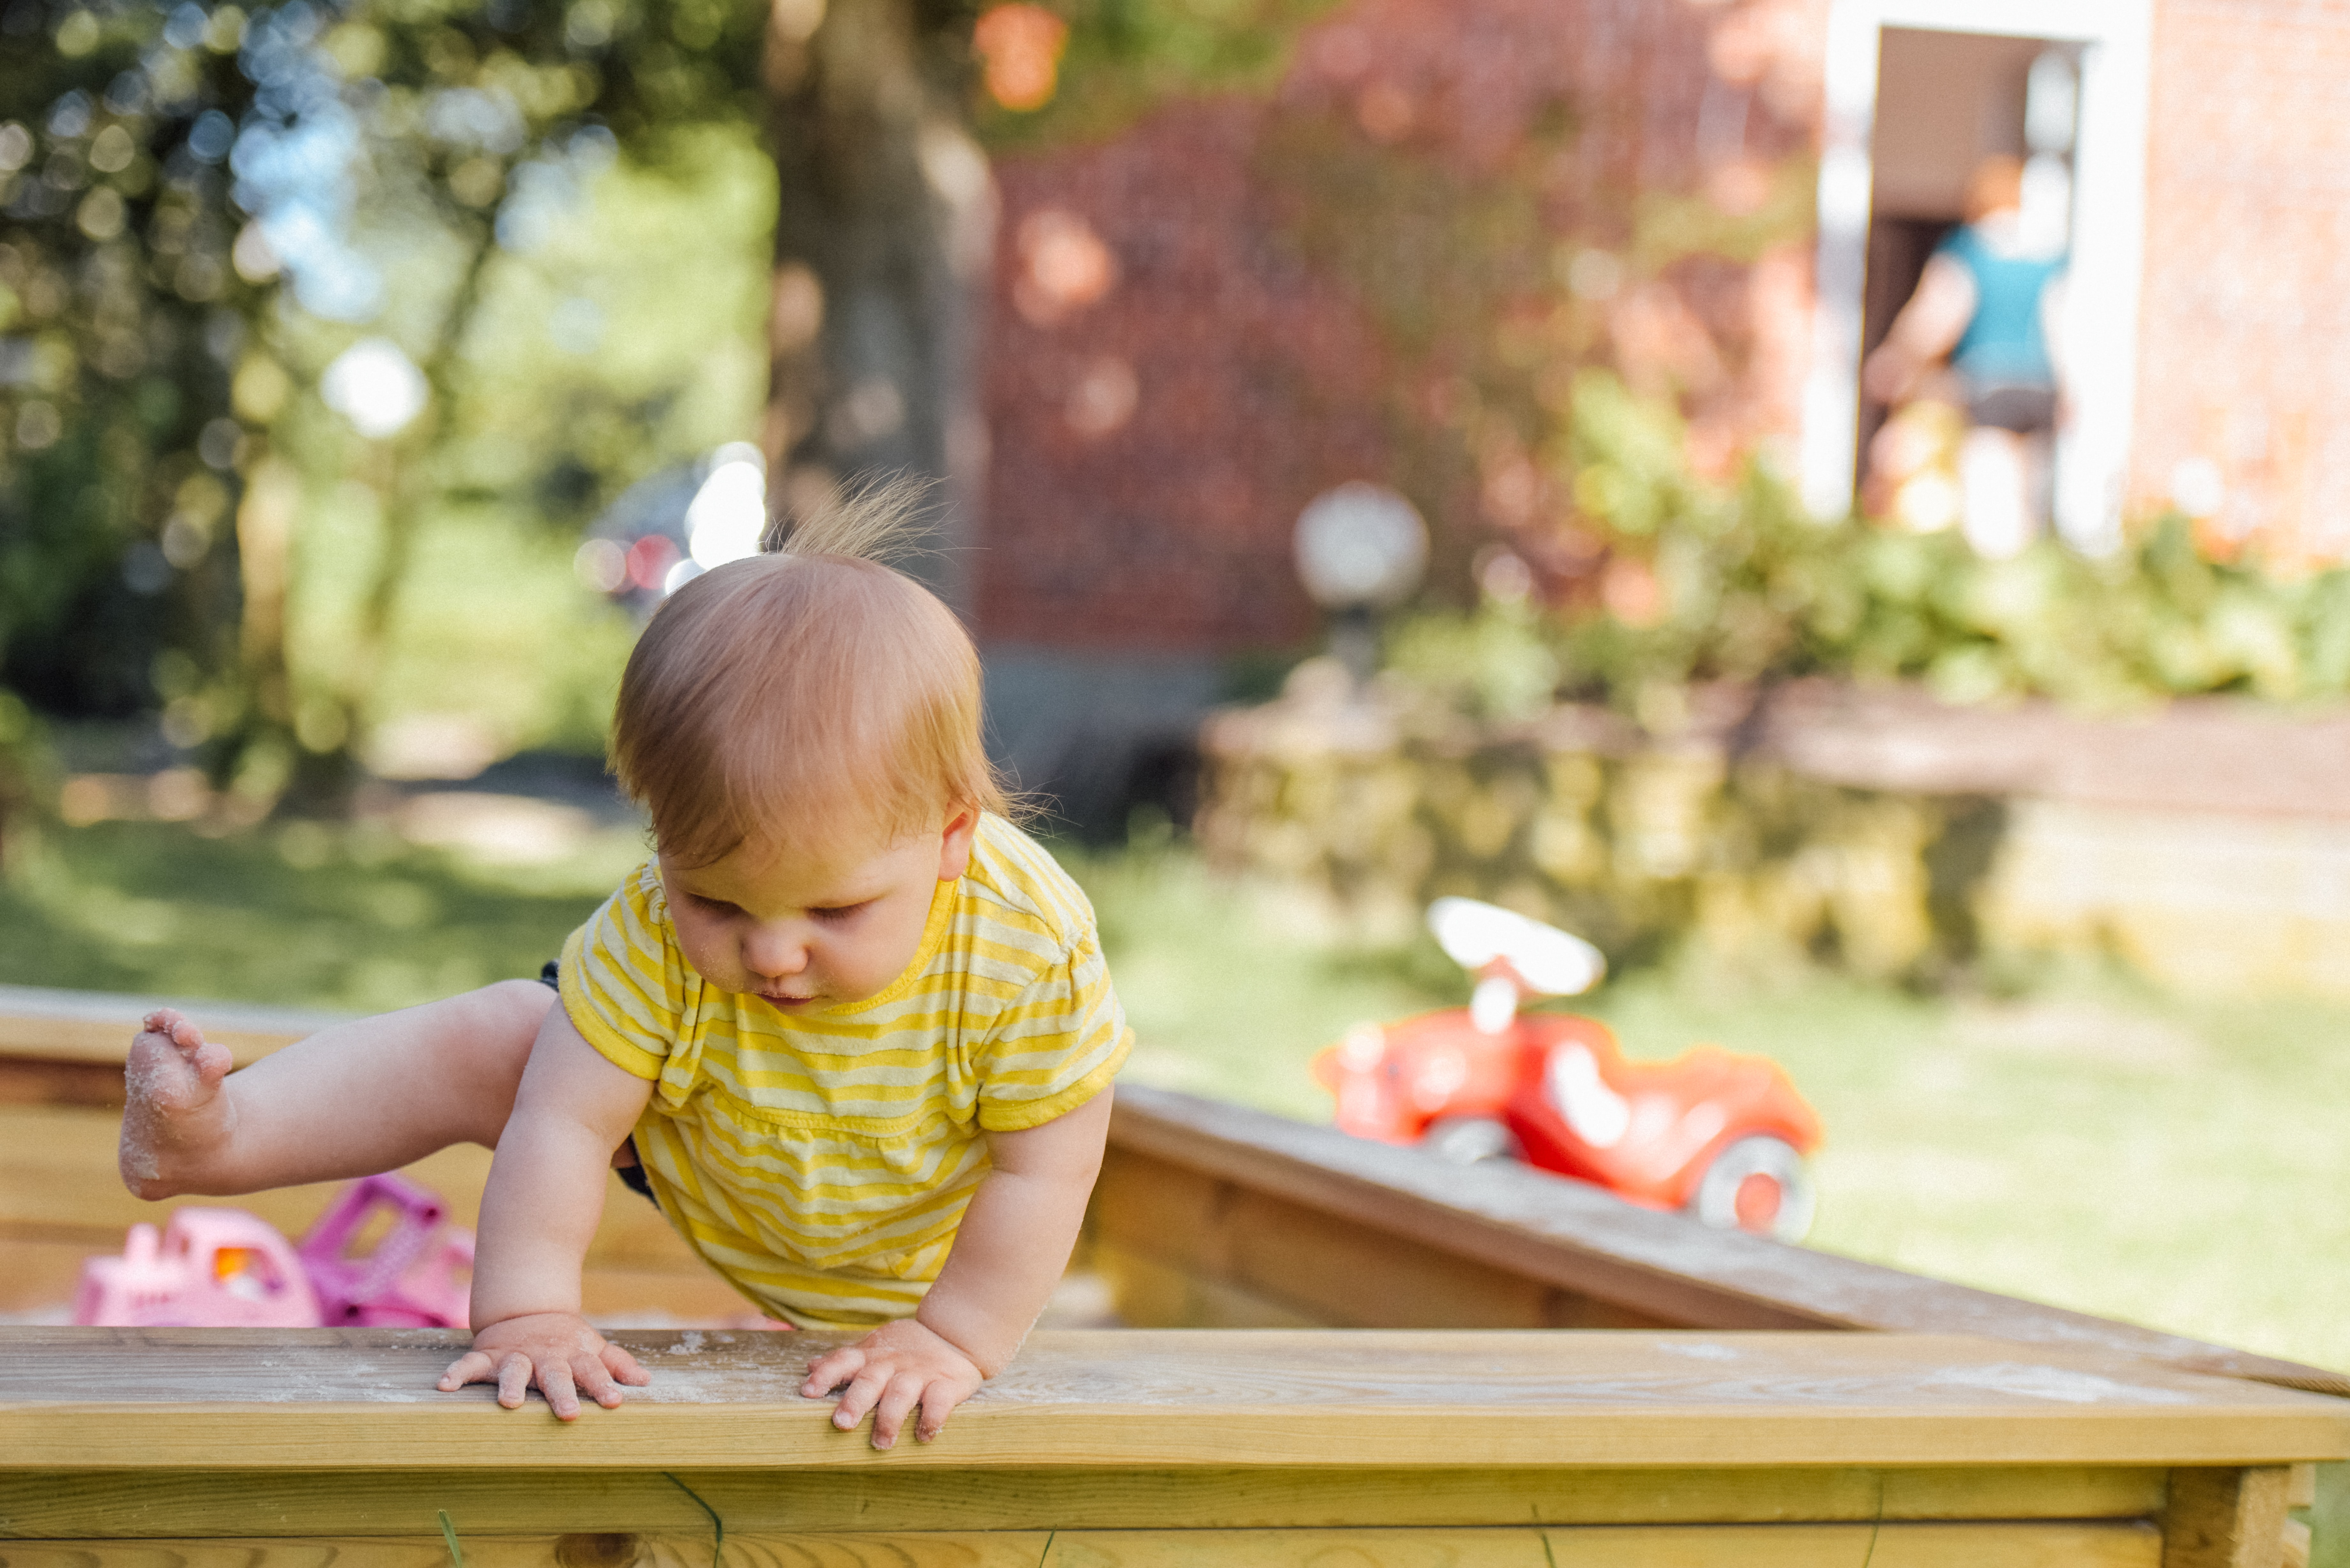 Baby girl wearing a yellow top climbing over a wooden playpen in the garden